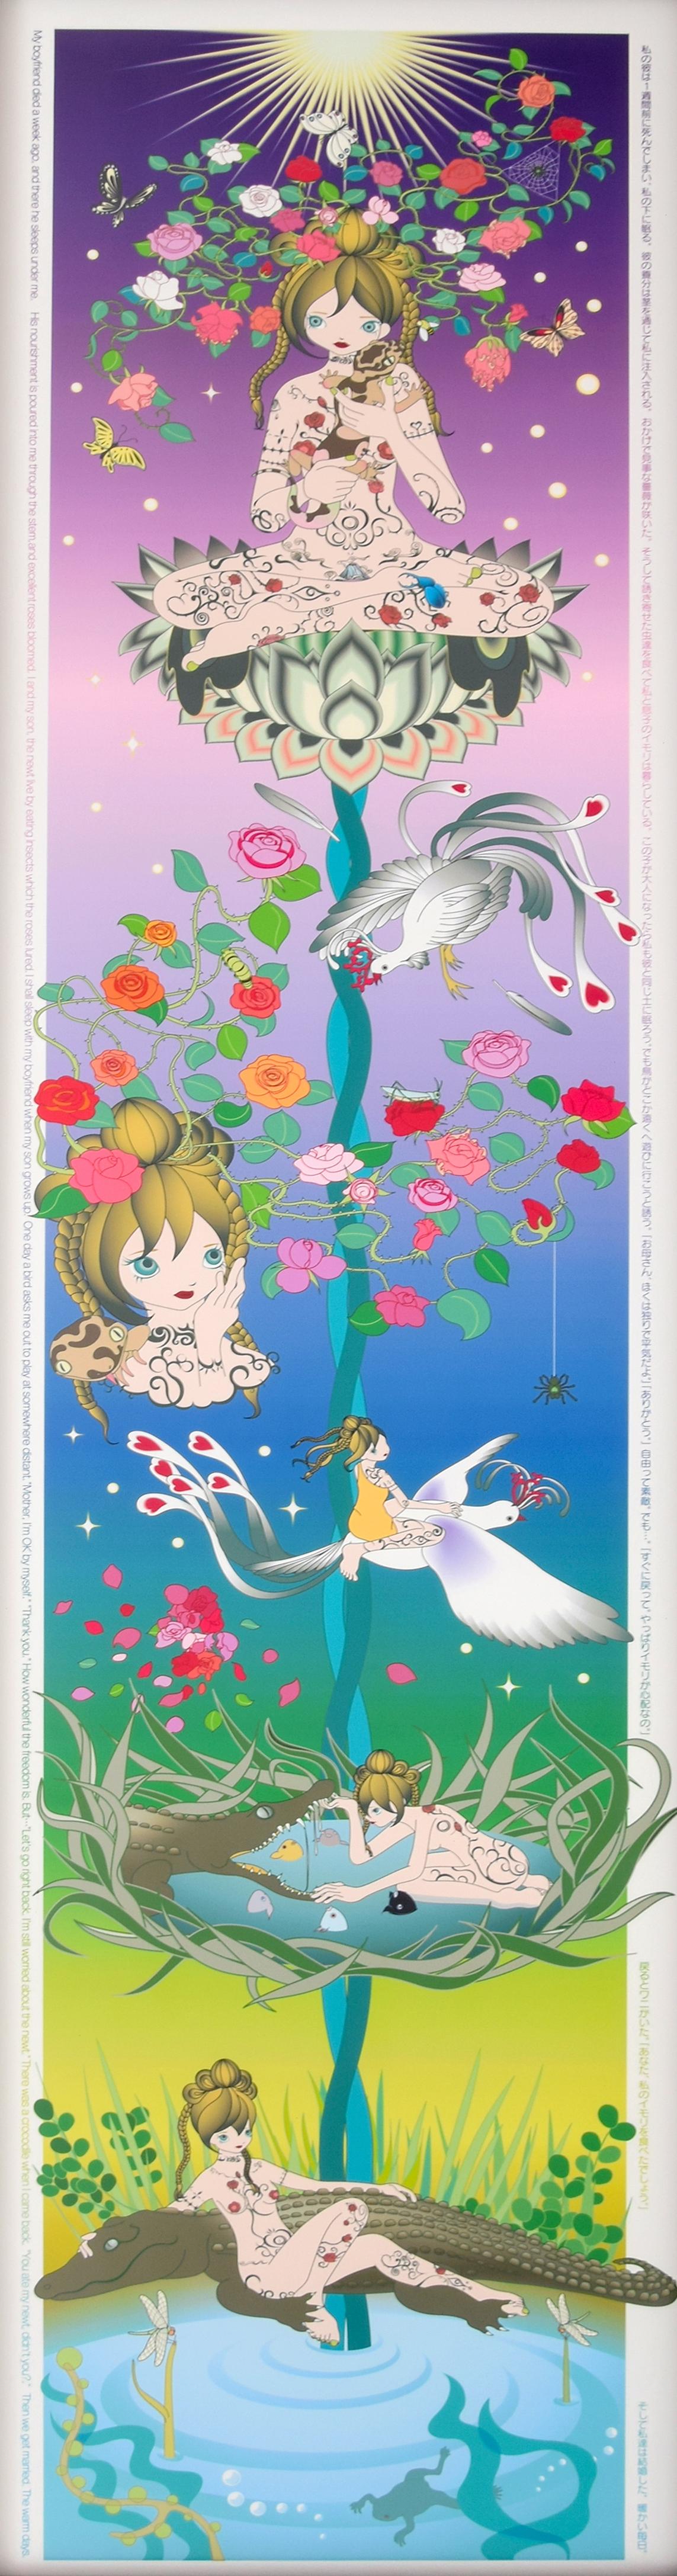 Large Chiho Aoshima “Ornamental Hairpin of the Rose” Print